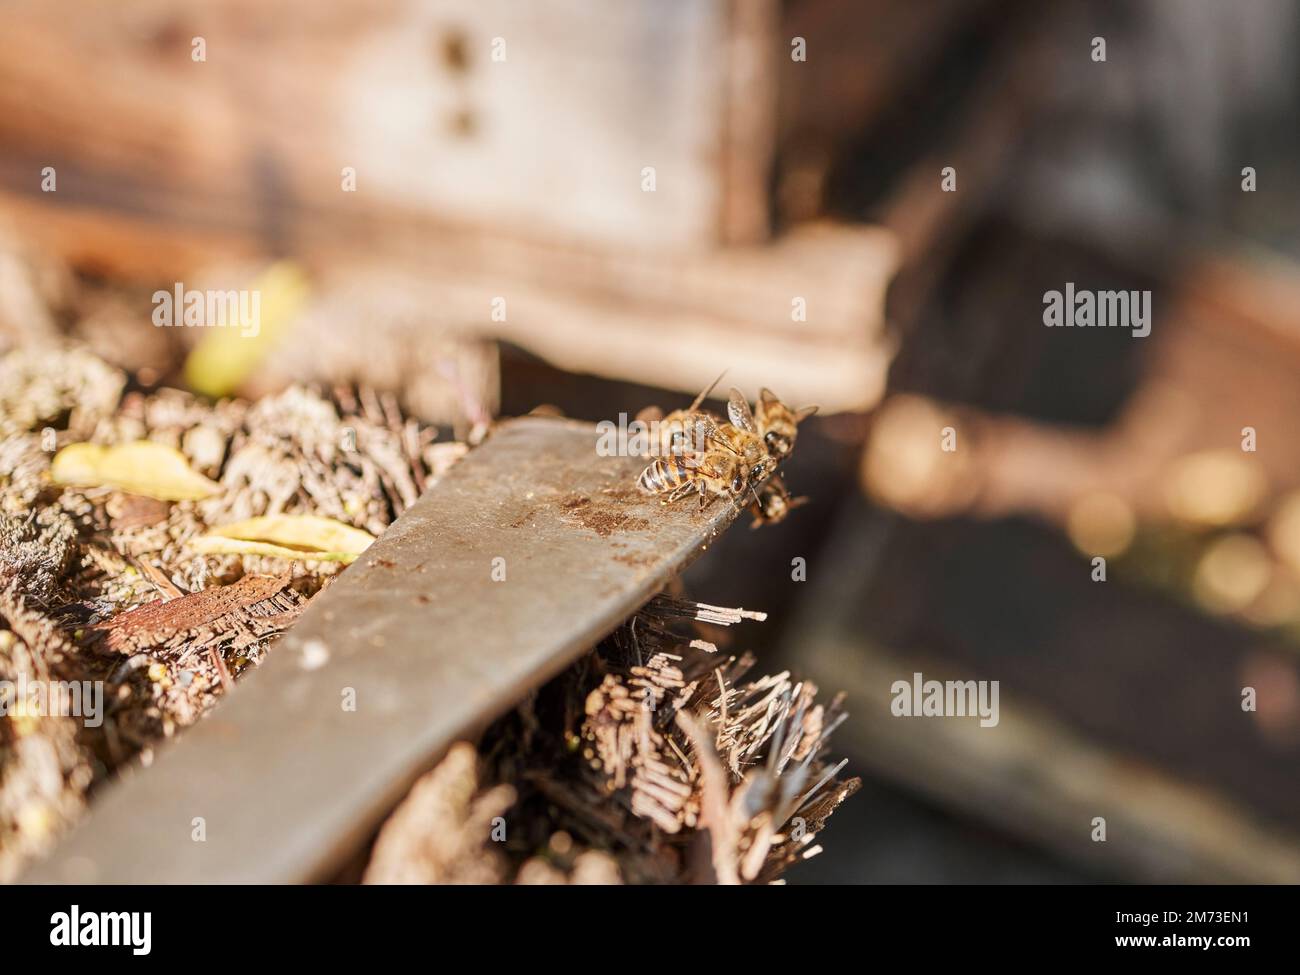 Focus on bees in hive, farming of honey production and organic environmental industry of sustainable beekeeping with tools. Agriculture industry Stock Photo